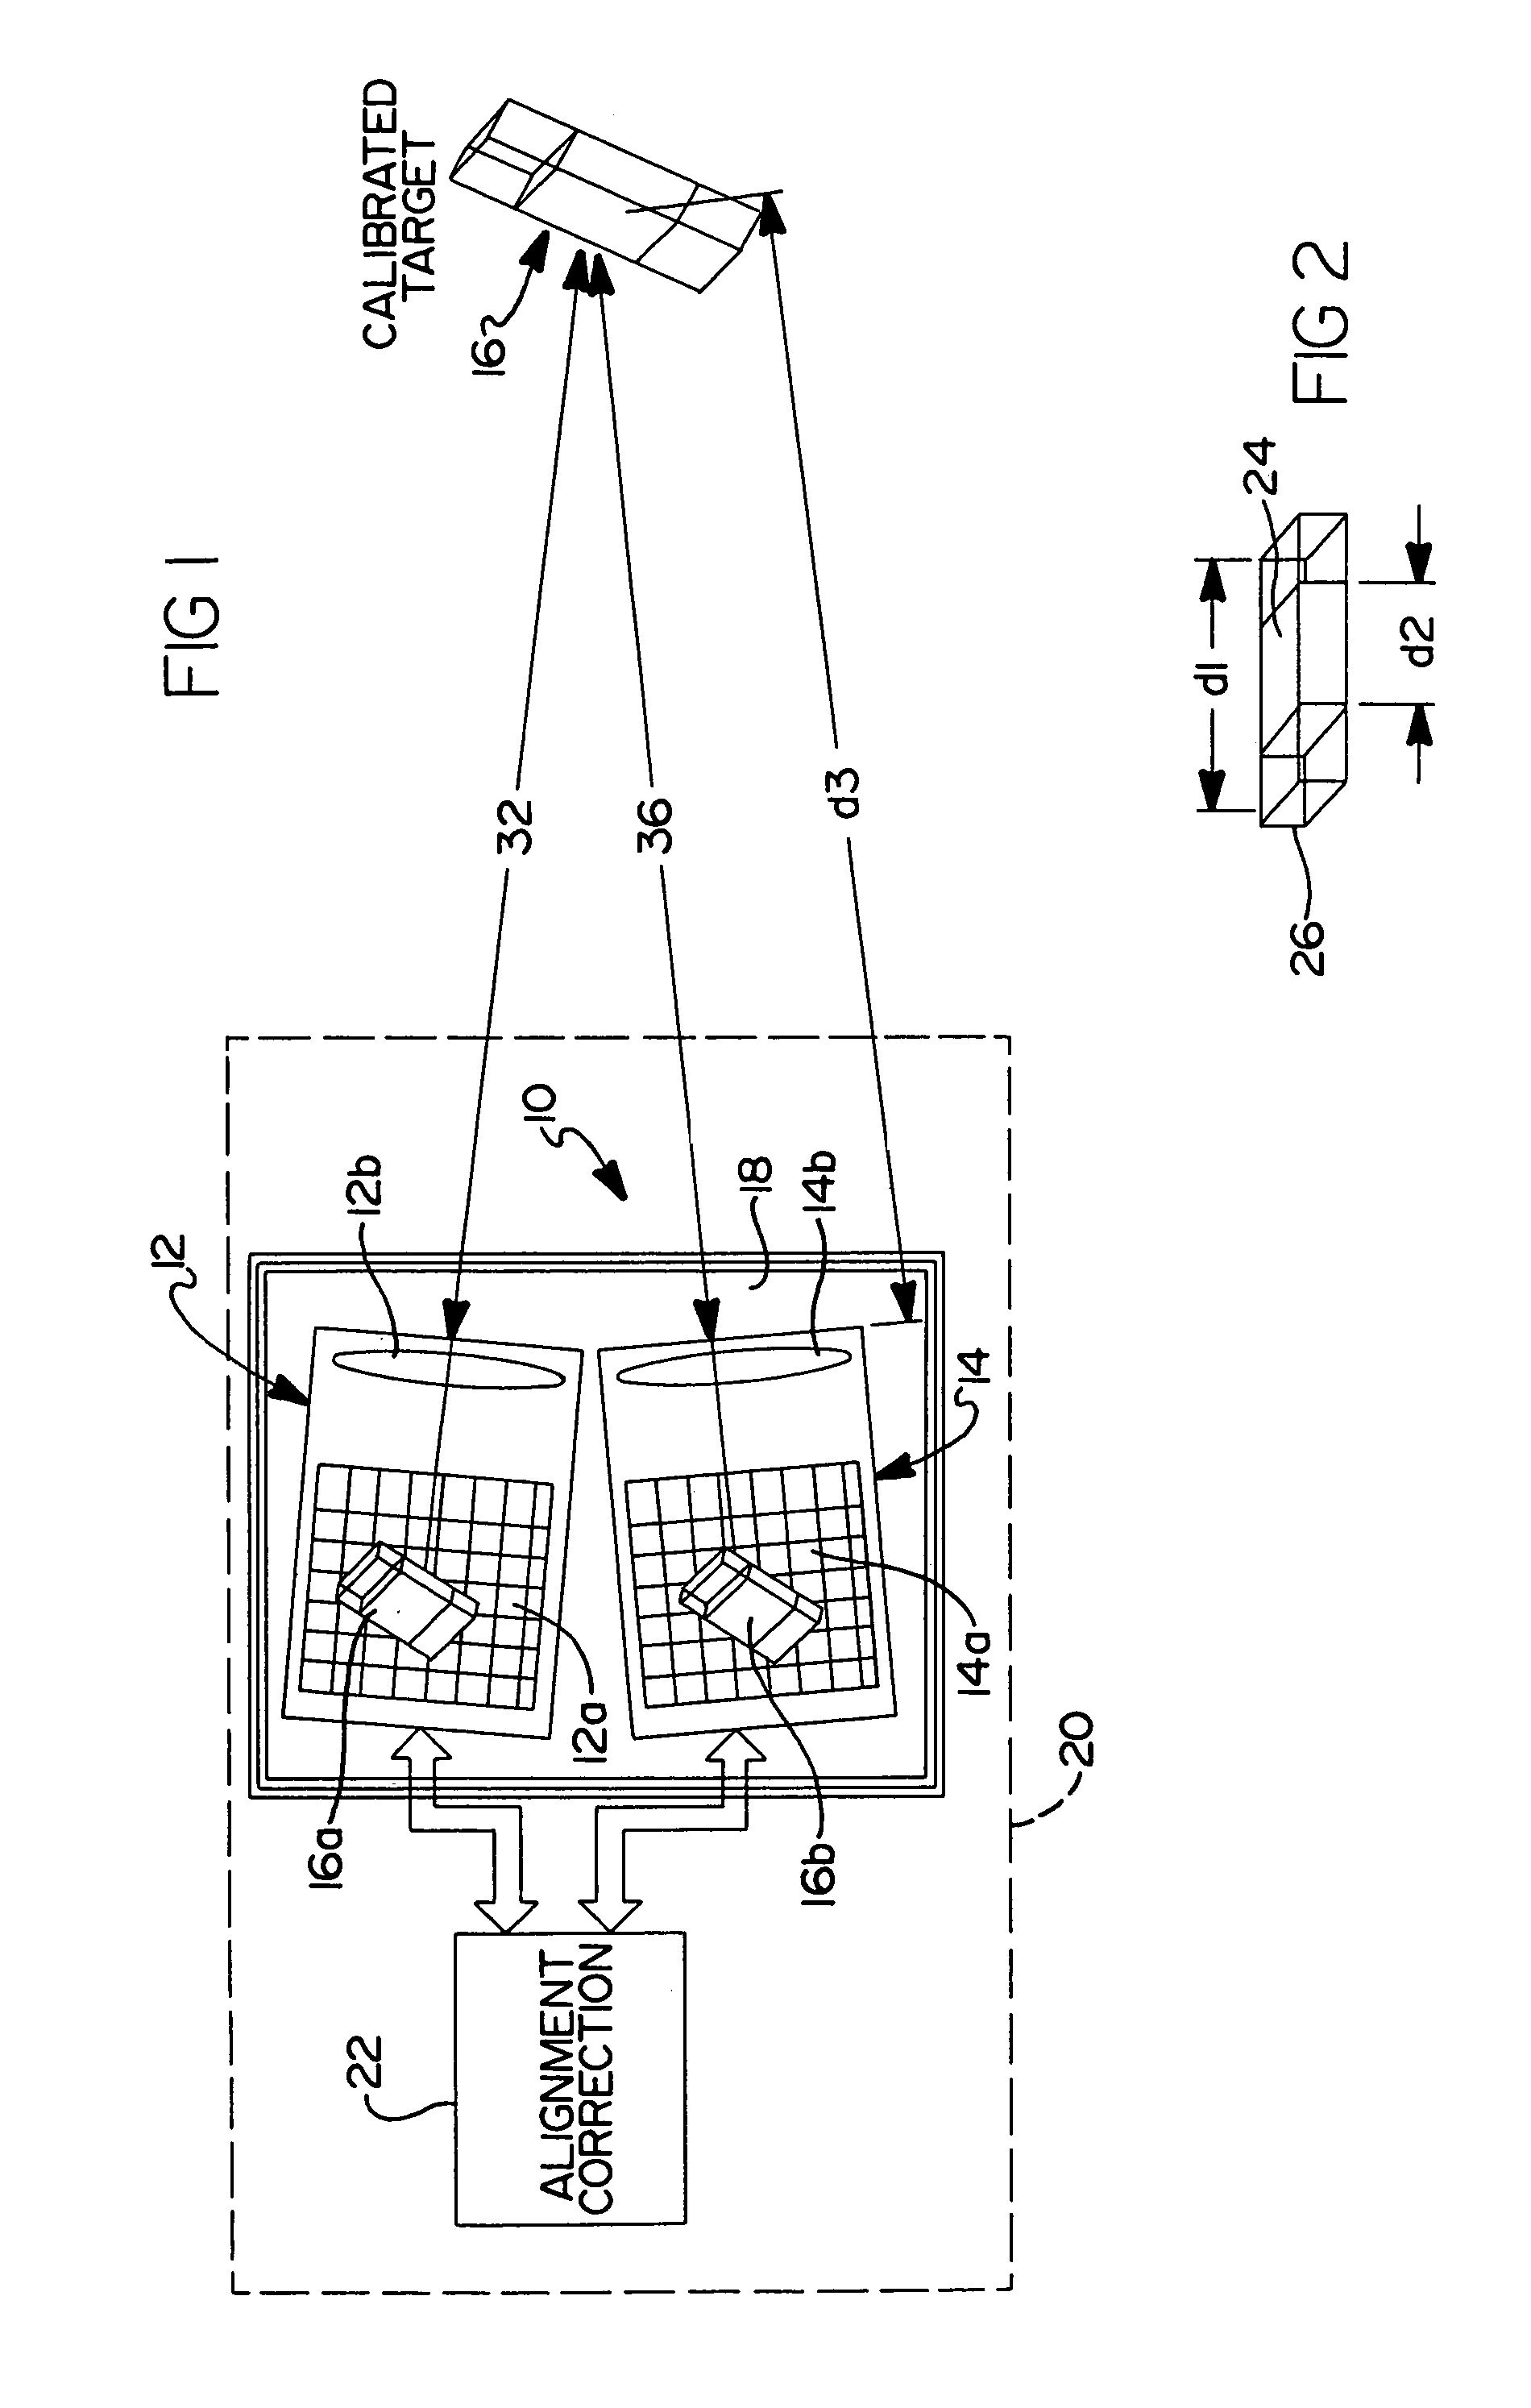 Method and apparatus for aligning a pair of digital cameras forming a three dimensional image to compensate for a physical misalignment of cameras